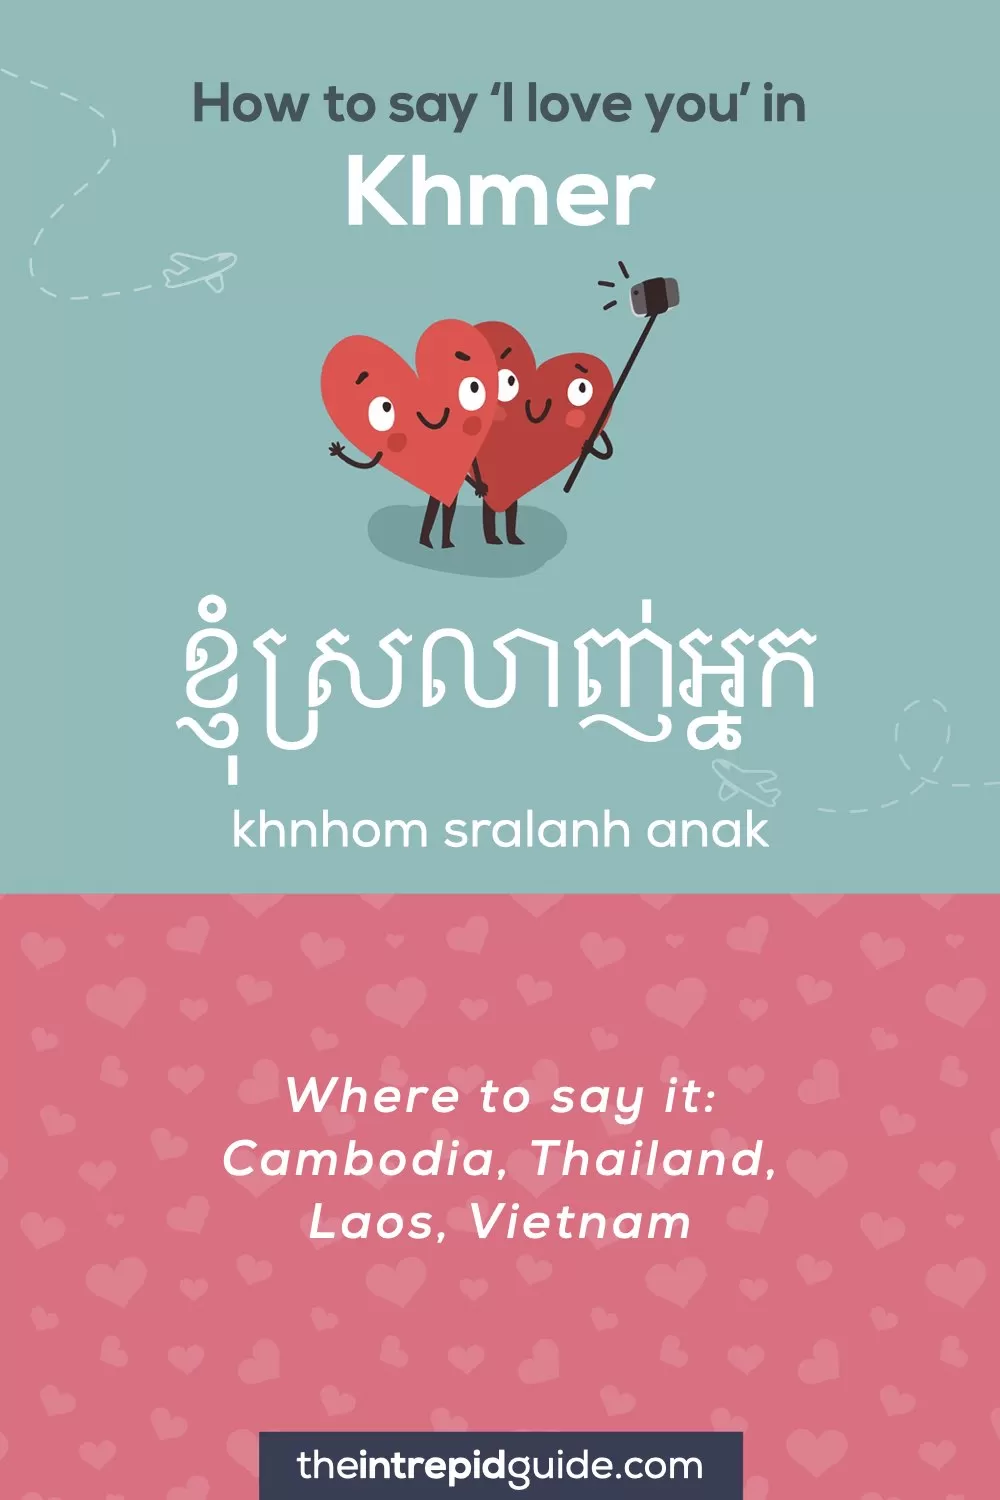 How to say I love you in different languages - Khmer - ខ្ញុំ​ស្រលាញ់​អ្នក